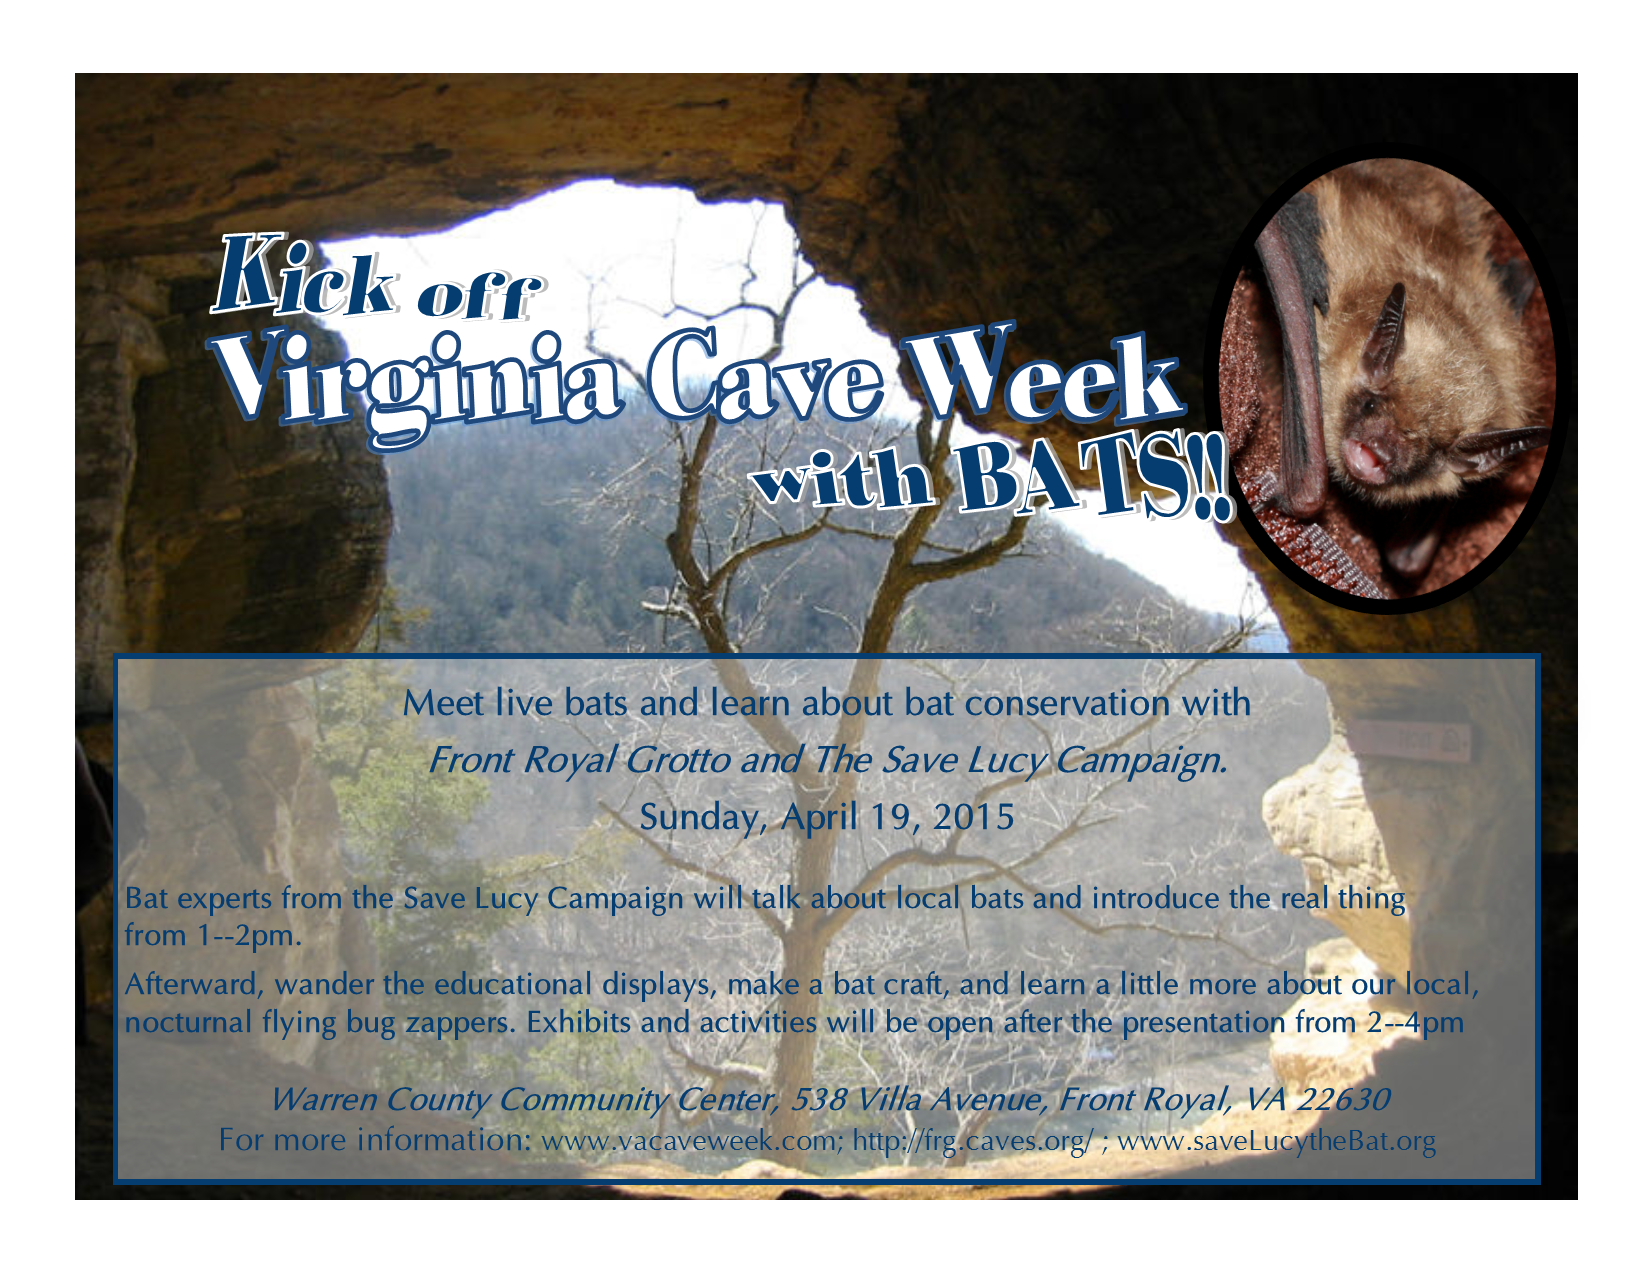 A flyer with details about Virginia Cave Week special event. For more information, please call 703-973-3157